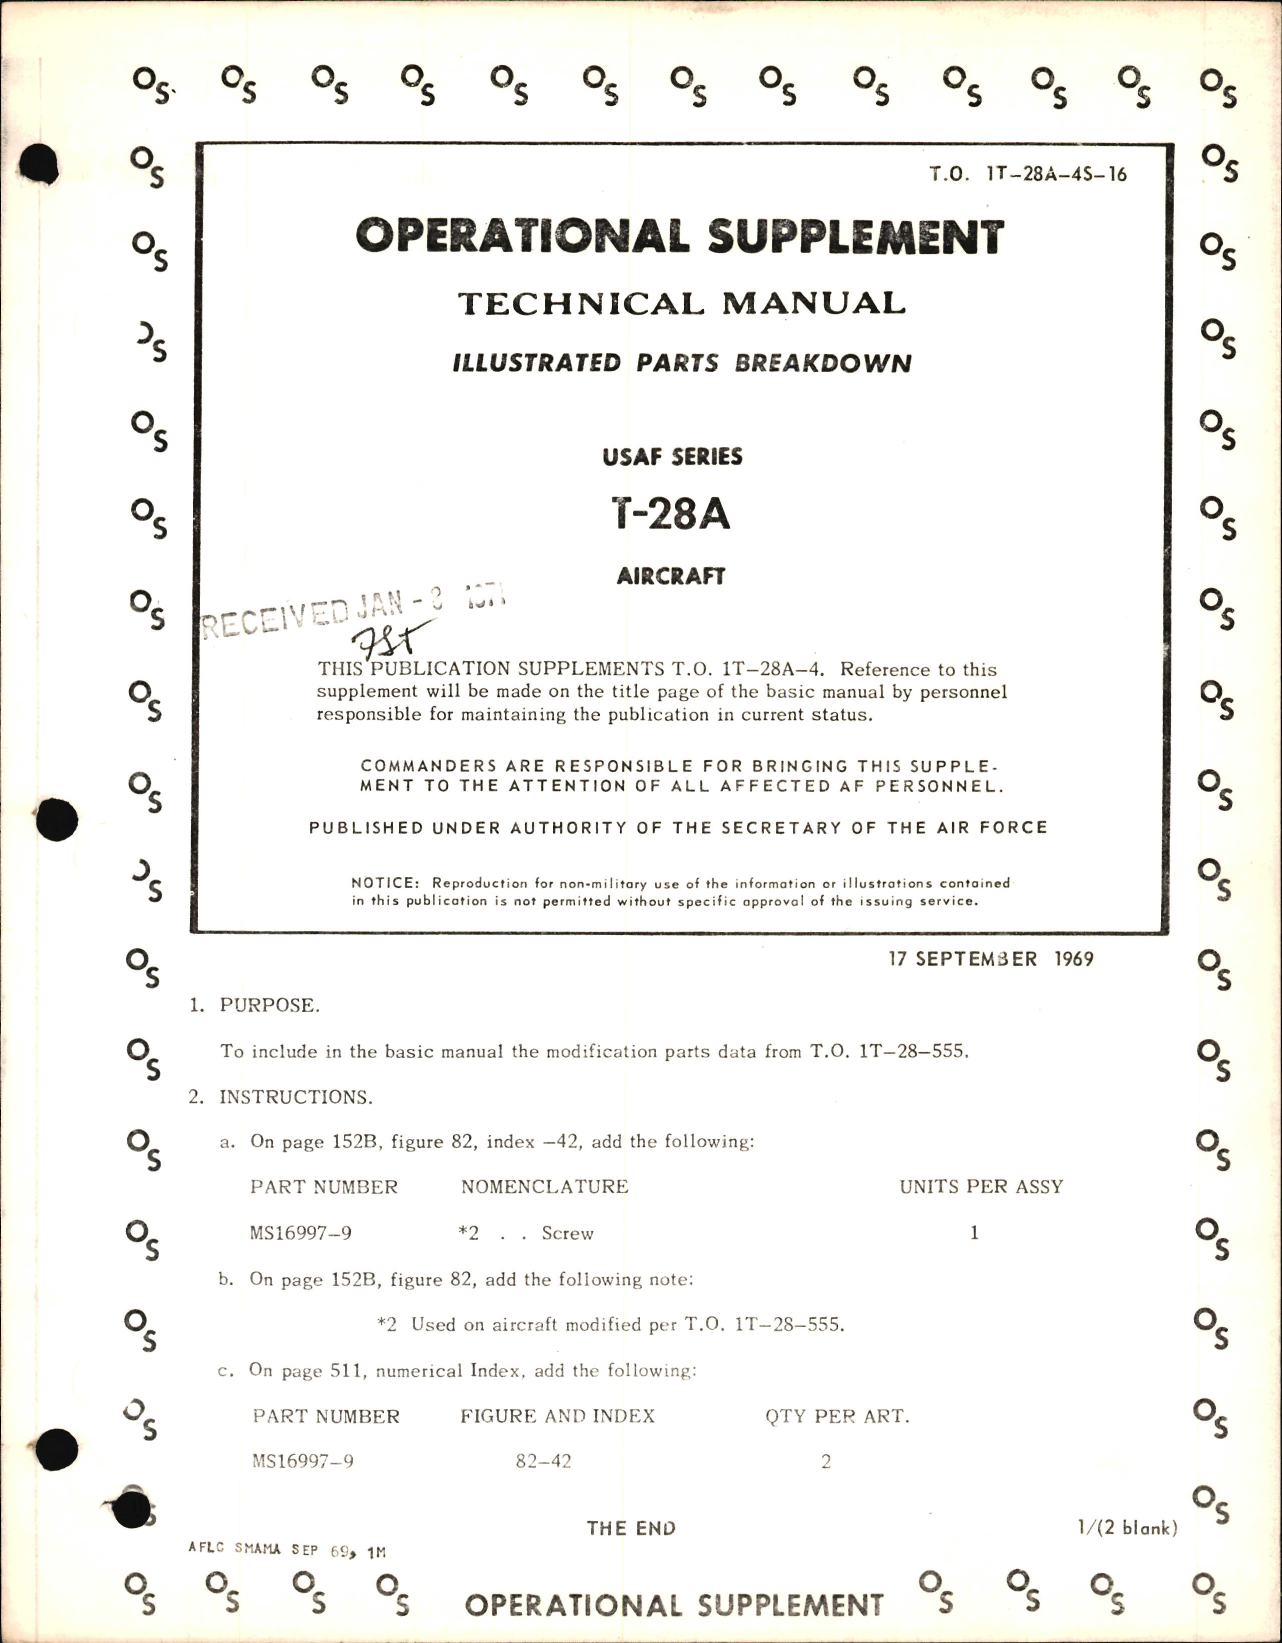 Sample page 1 from AirCorps Library document: Illustrated Parts Breakdown for T-28A - Operational Supplement